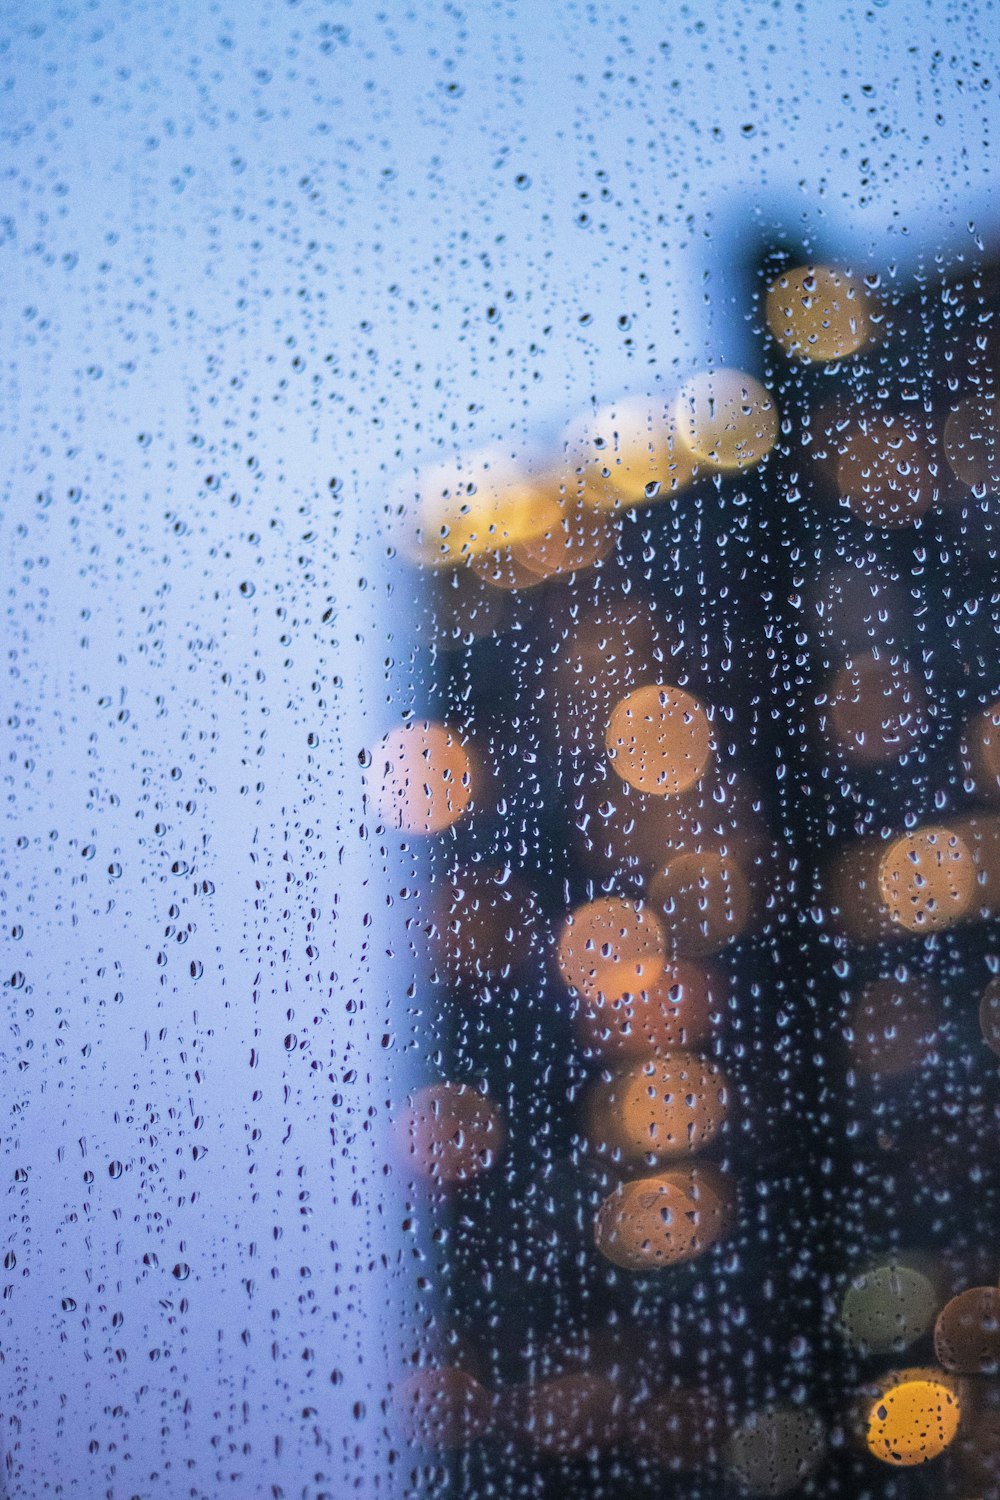 rain drops on a window with a building in the background